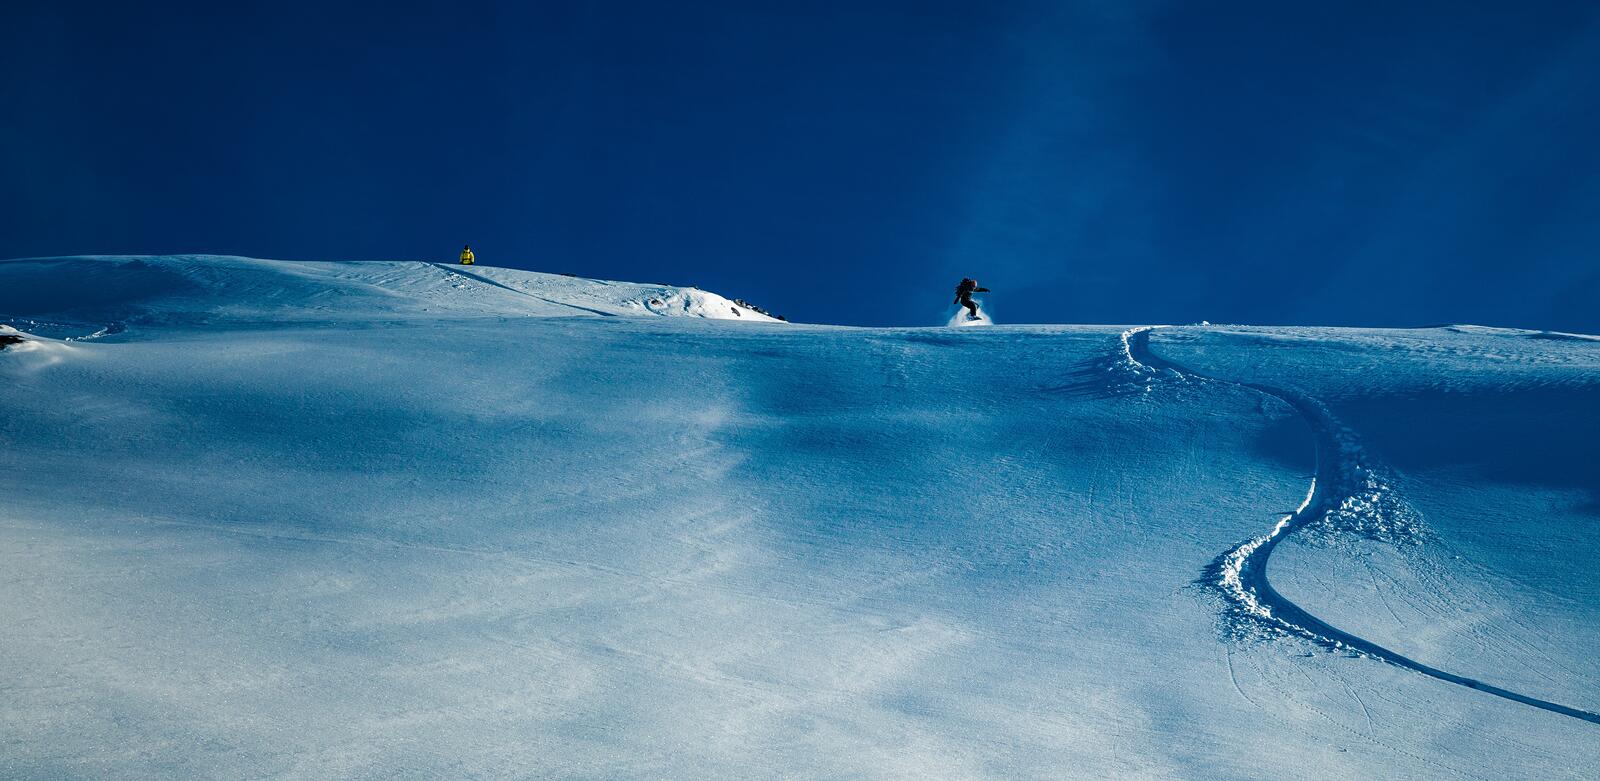 Free photo Snowboarders descending a snowy slope